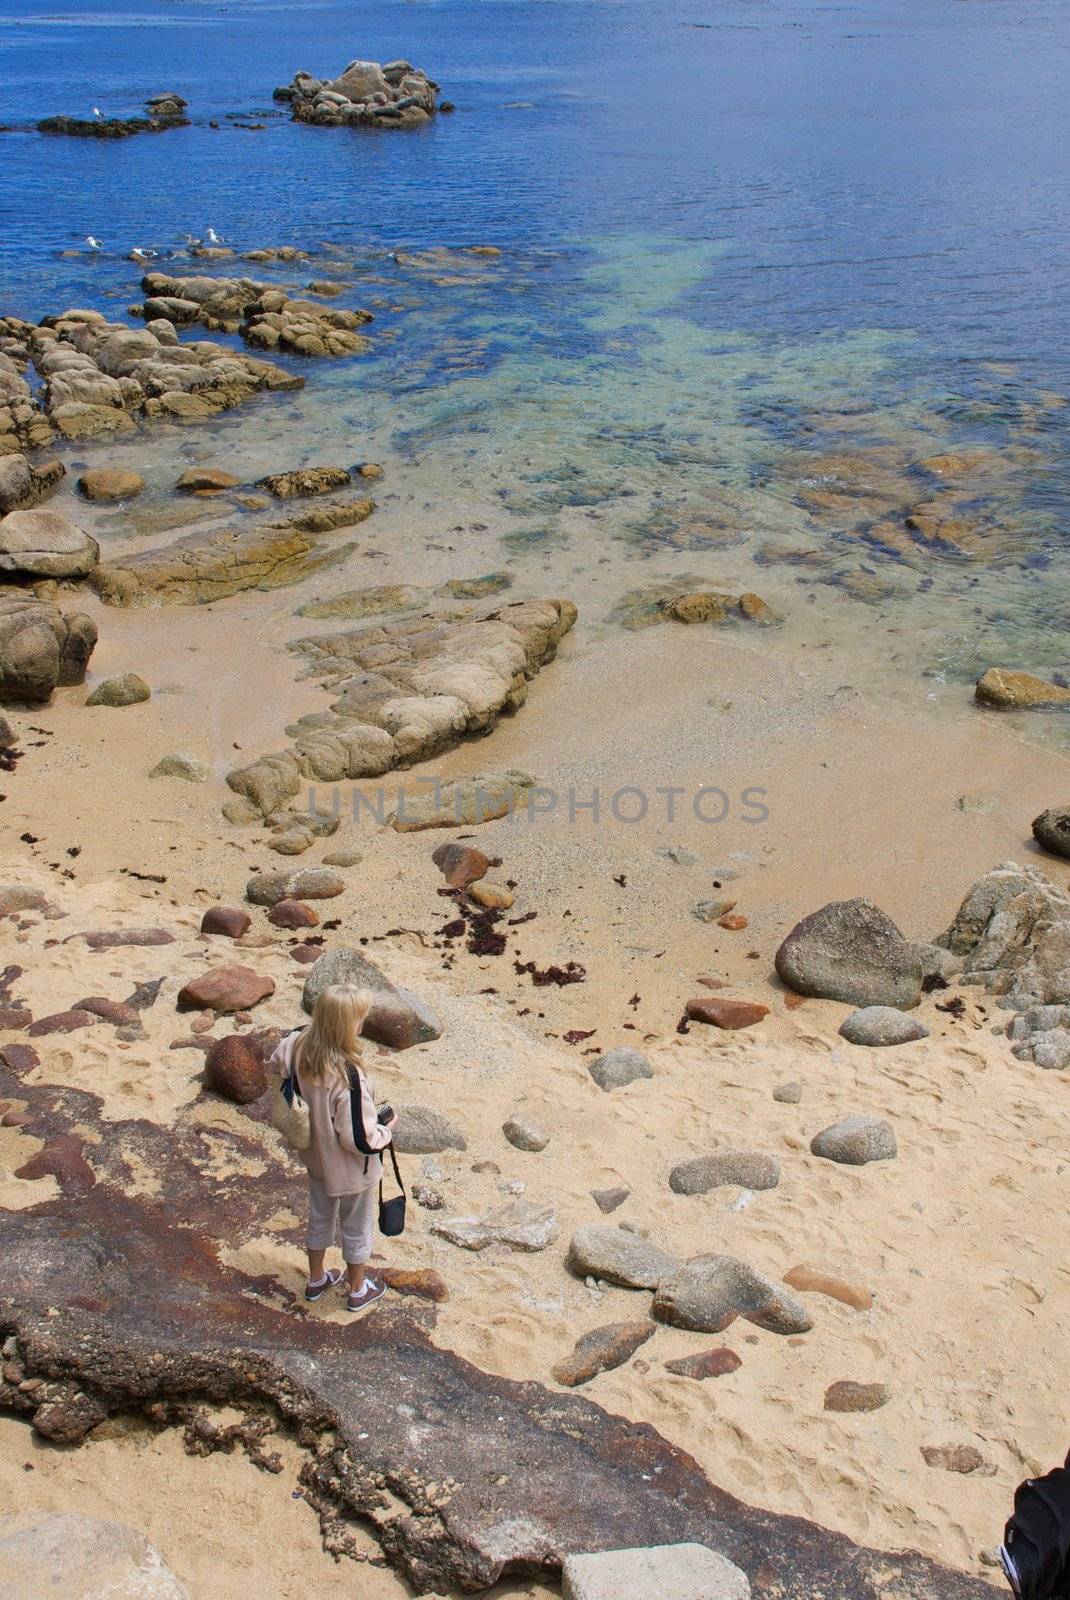 A tourist standing in a section of the rocky coastline in Monteray Bay, California